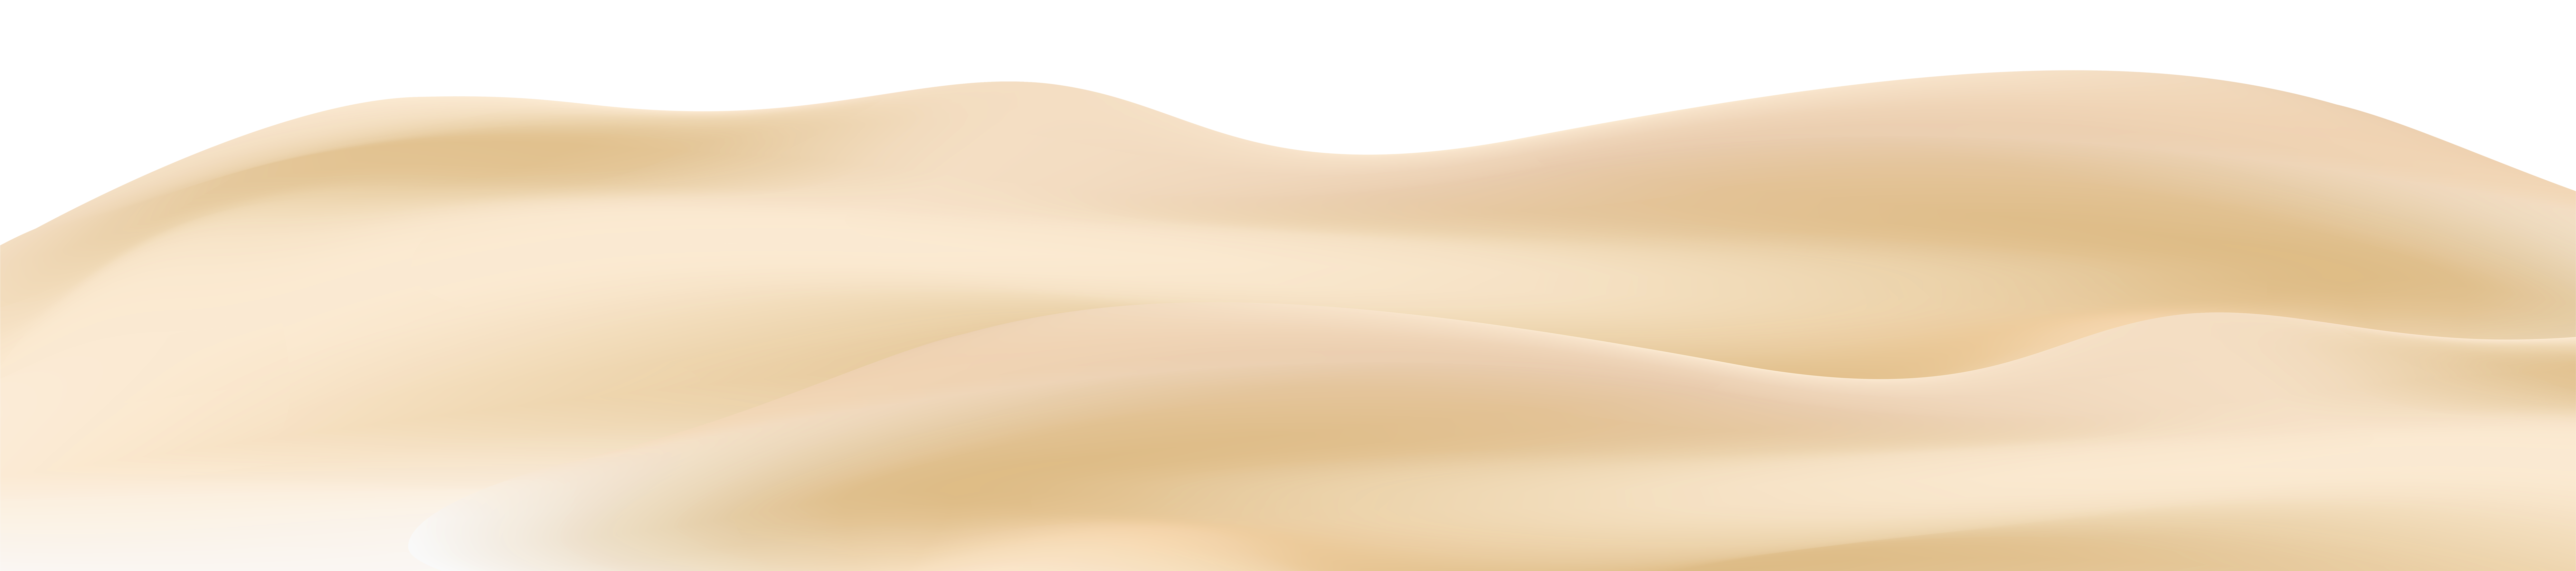 Waves clipart sand. Clip art png image